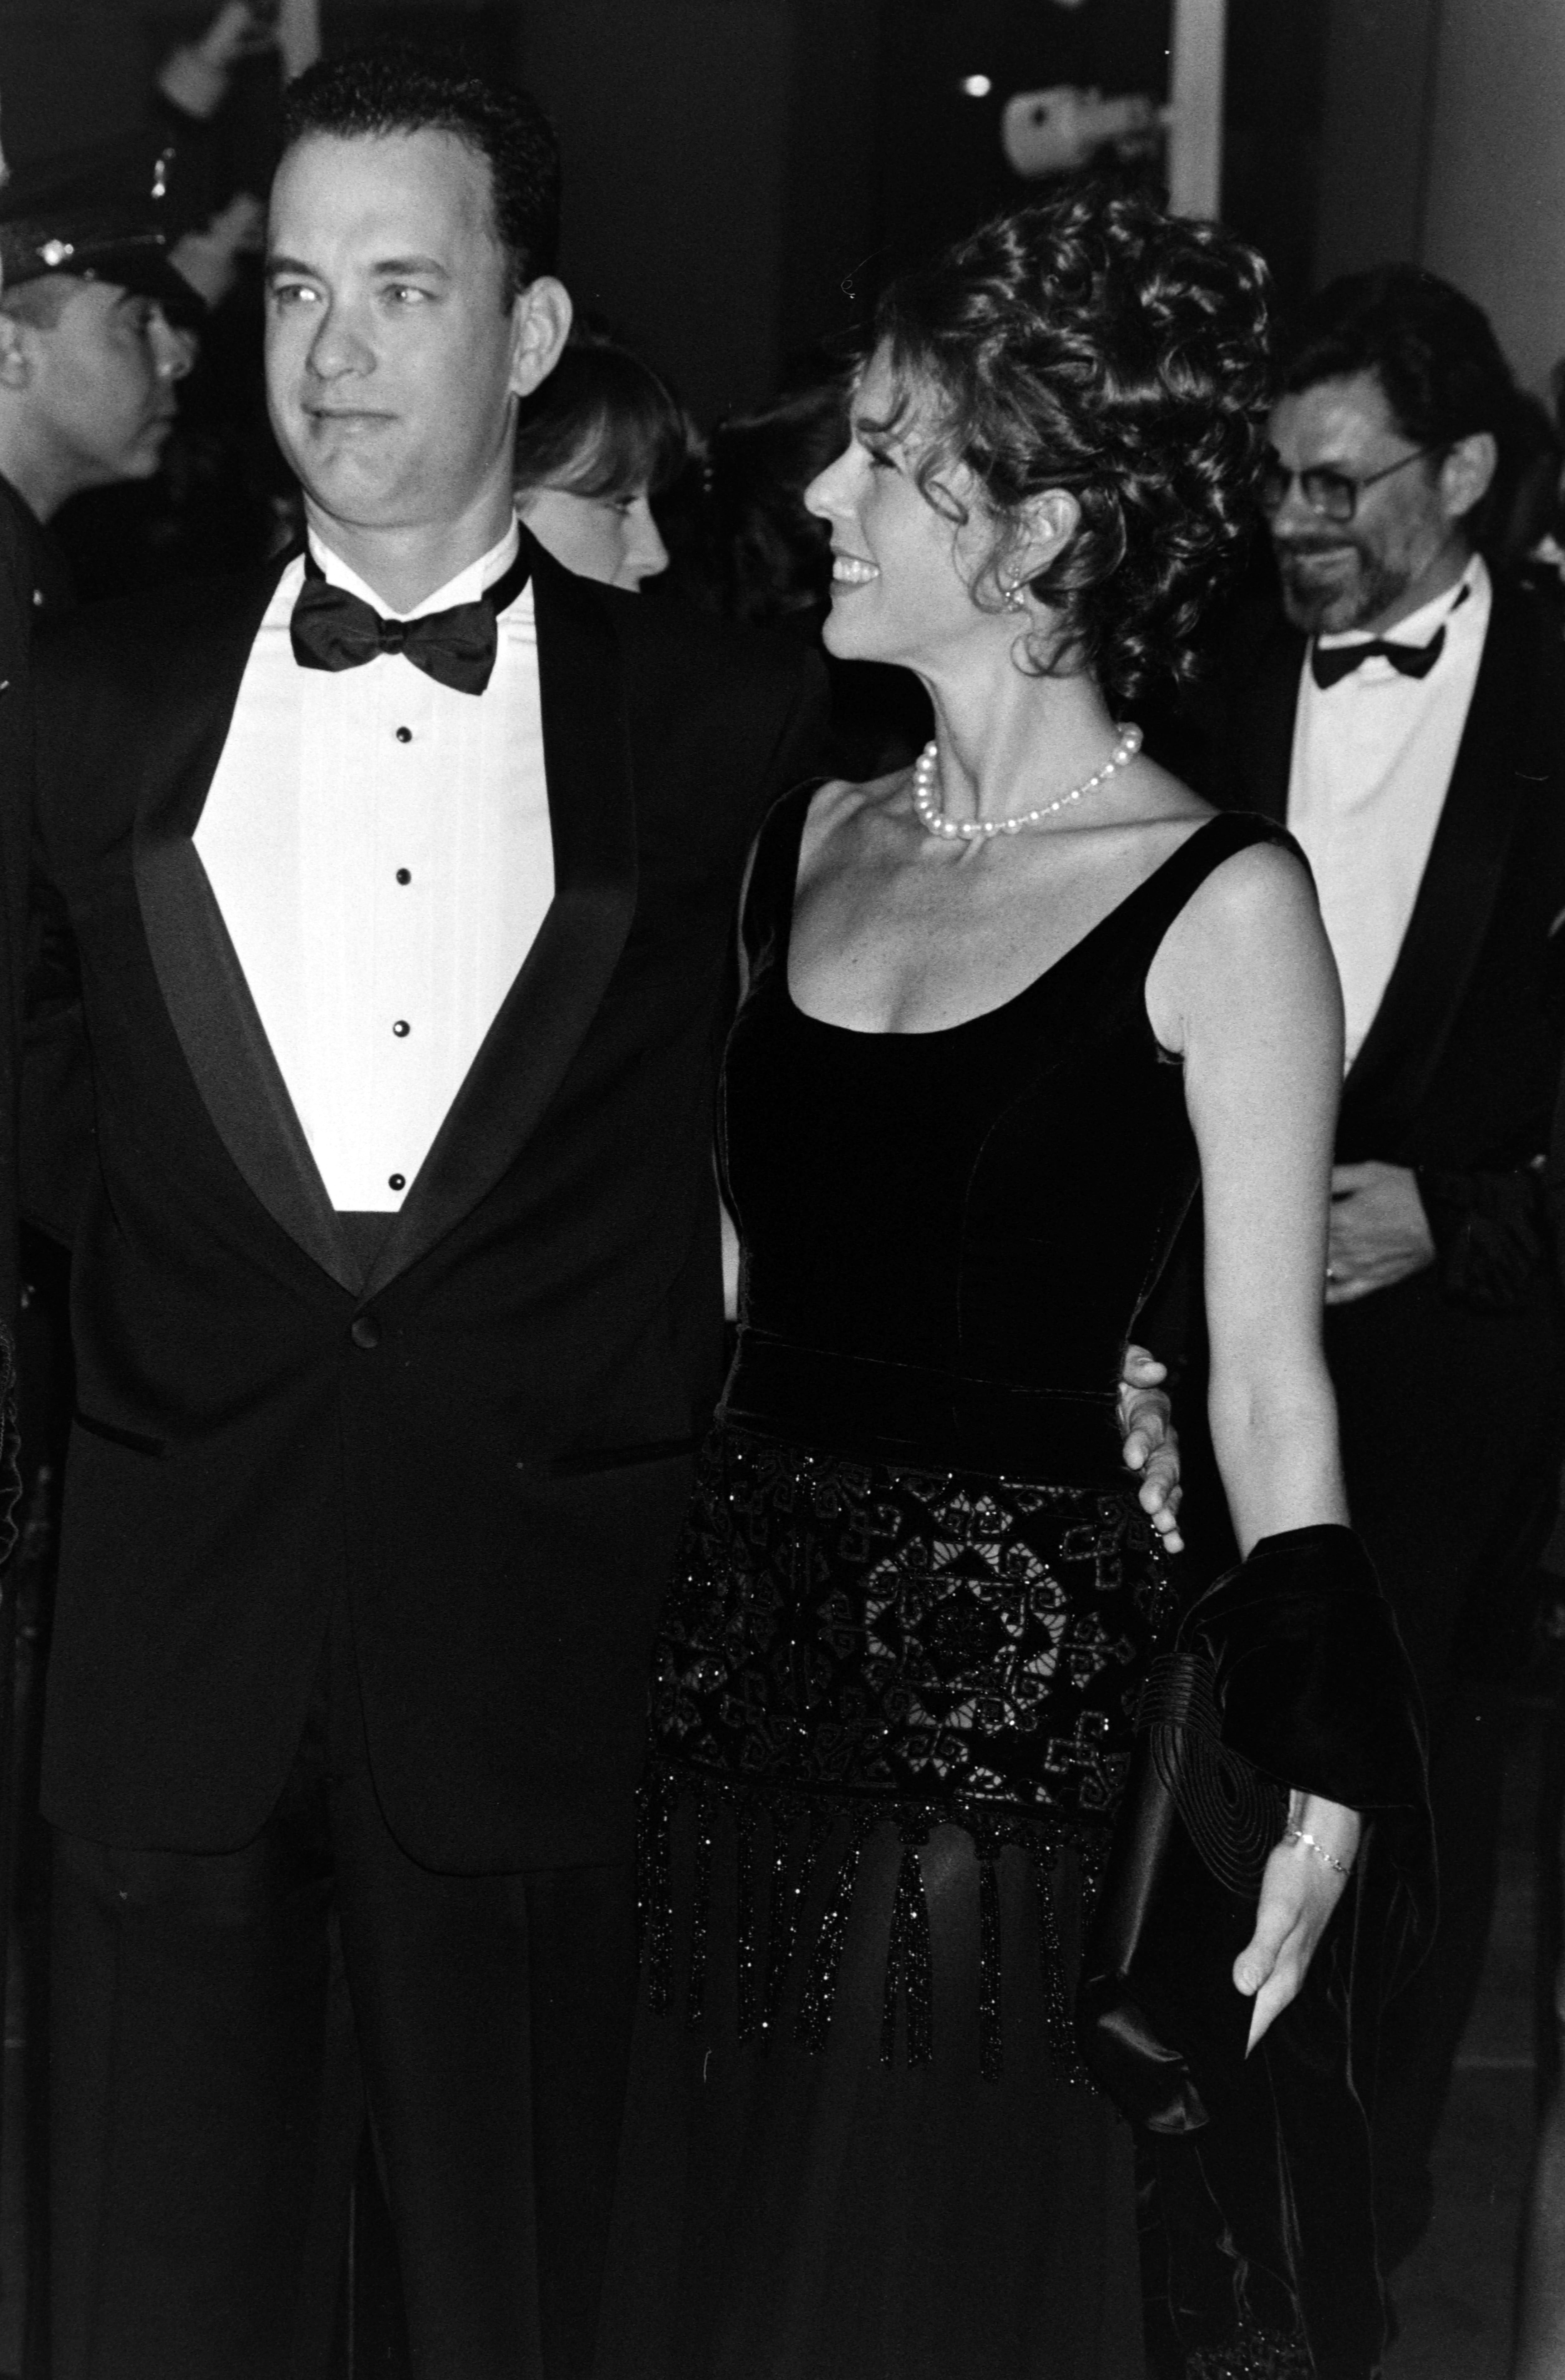 Tom Hanks and Rita wilson at the 51st Annual Golden Globe Awards in Beverly Hills, California on January 22, 1994 | Source: Getty Images